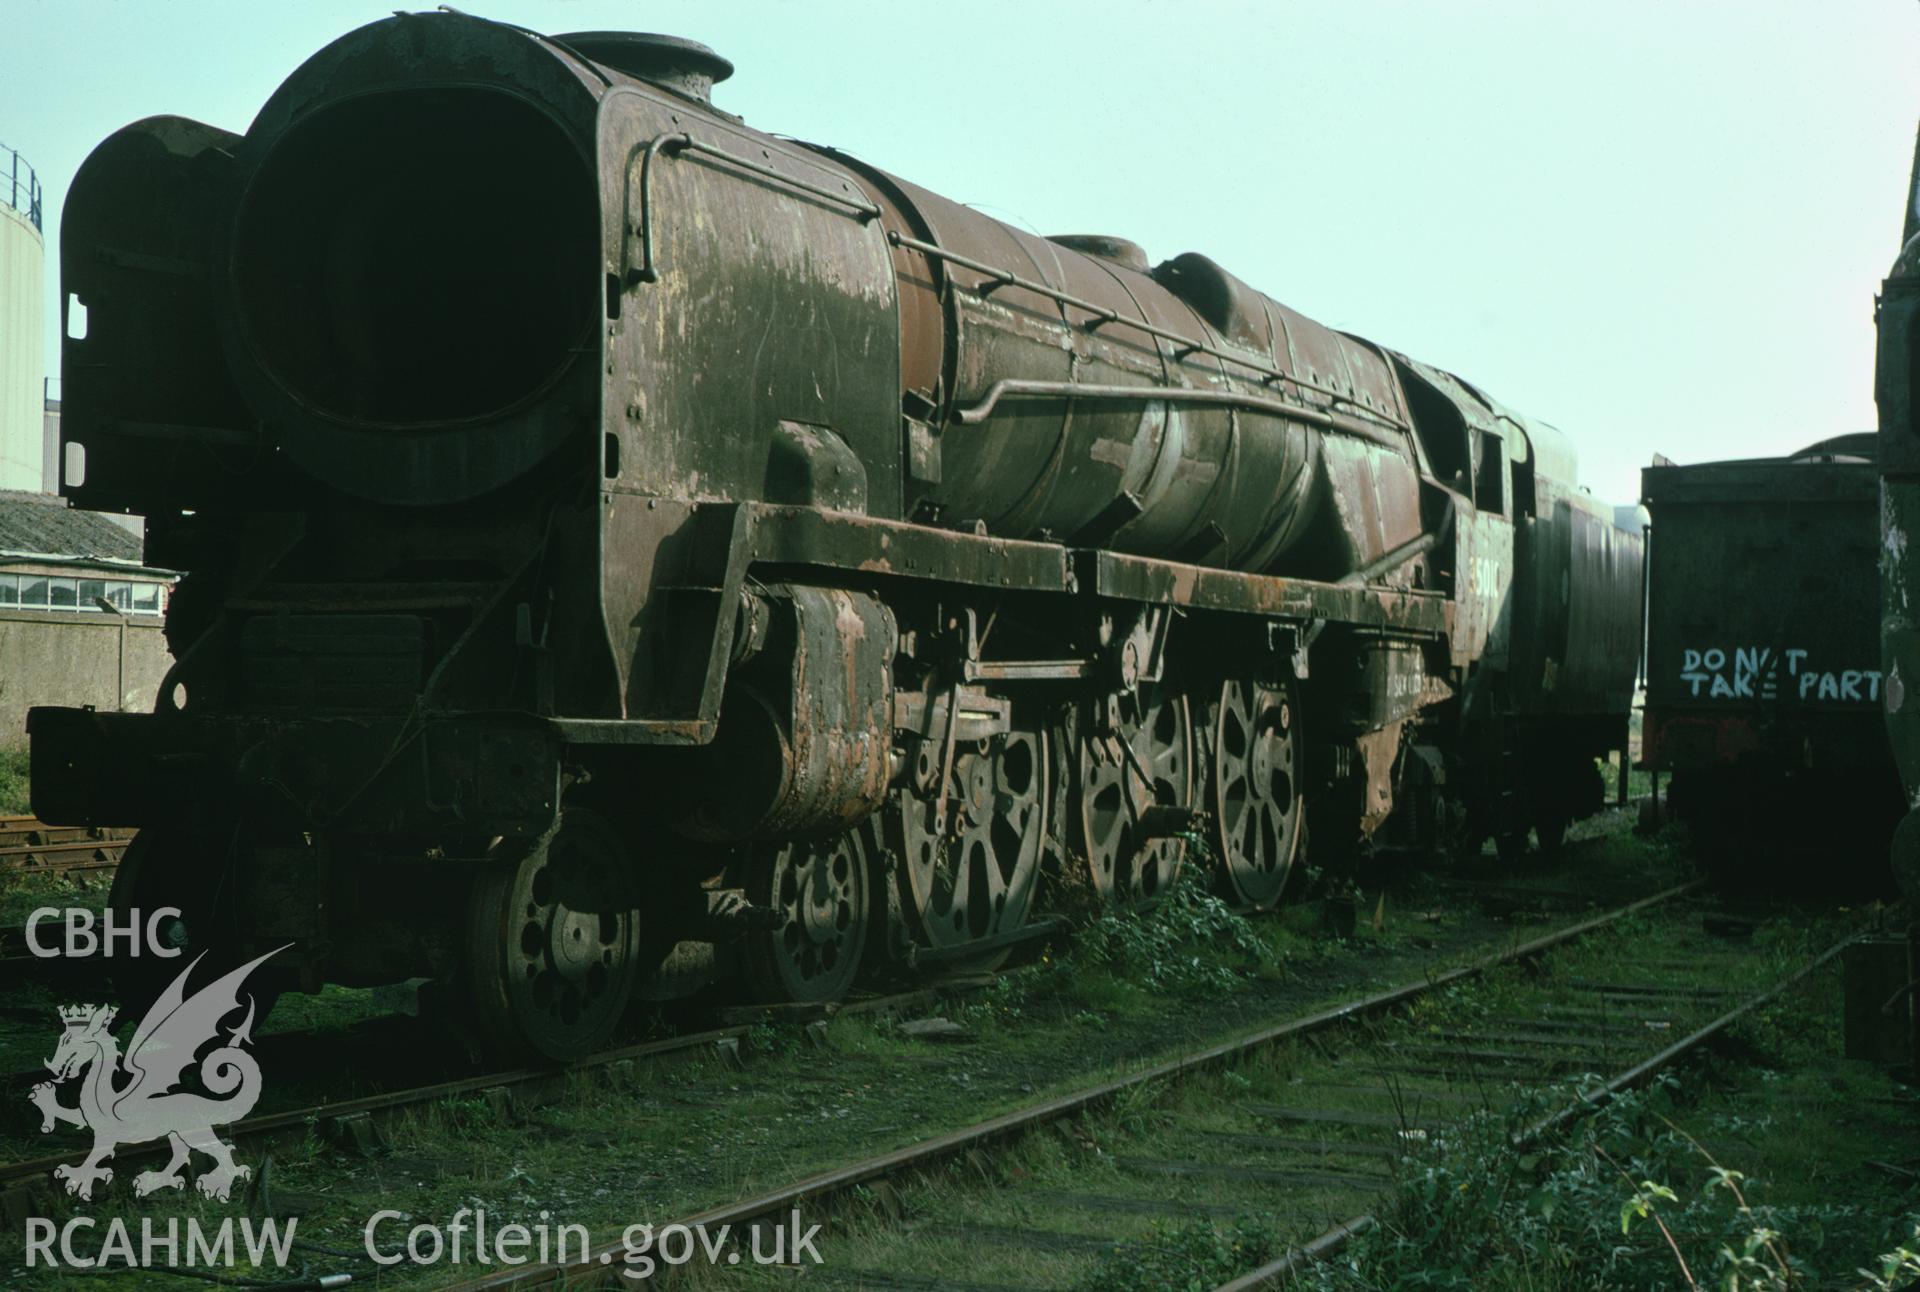 35mm colour slide showing steam locomotive in Barry Sidings, Glamorgan, by Dylan Roberts.